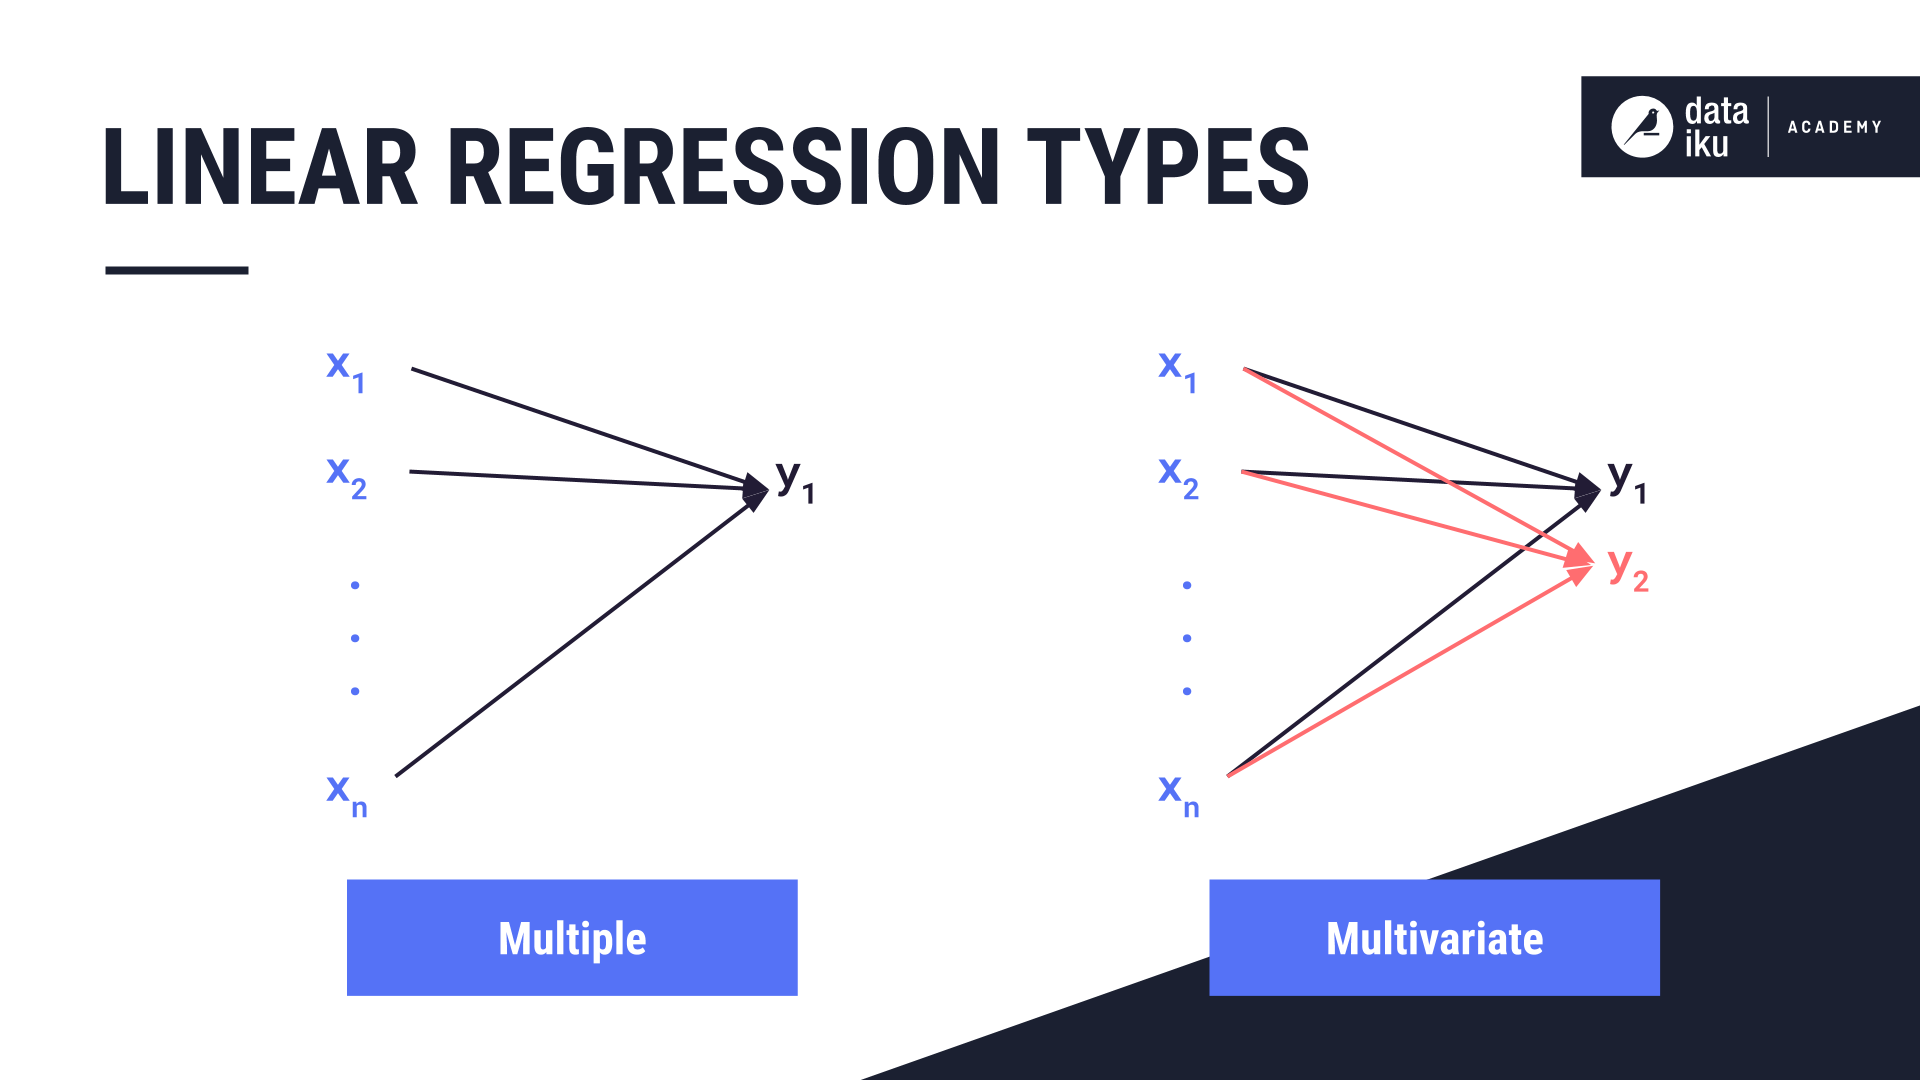 ../../_images/linear-regression-types.png